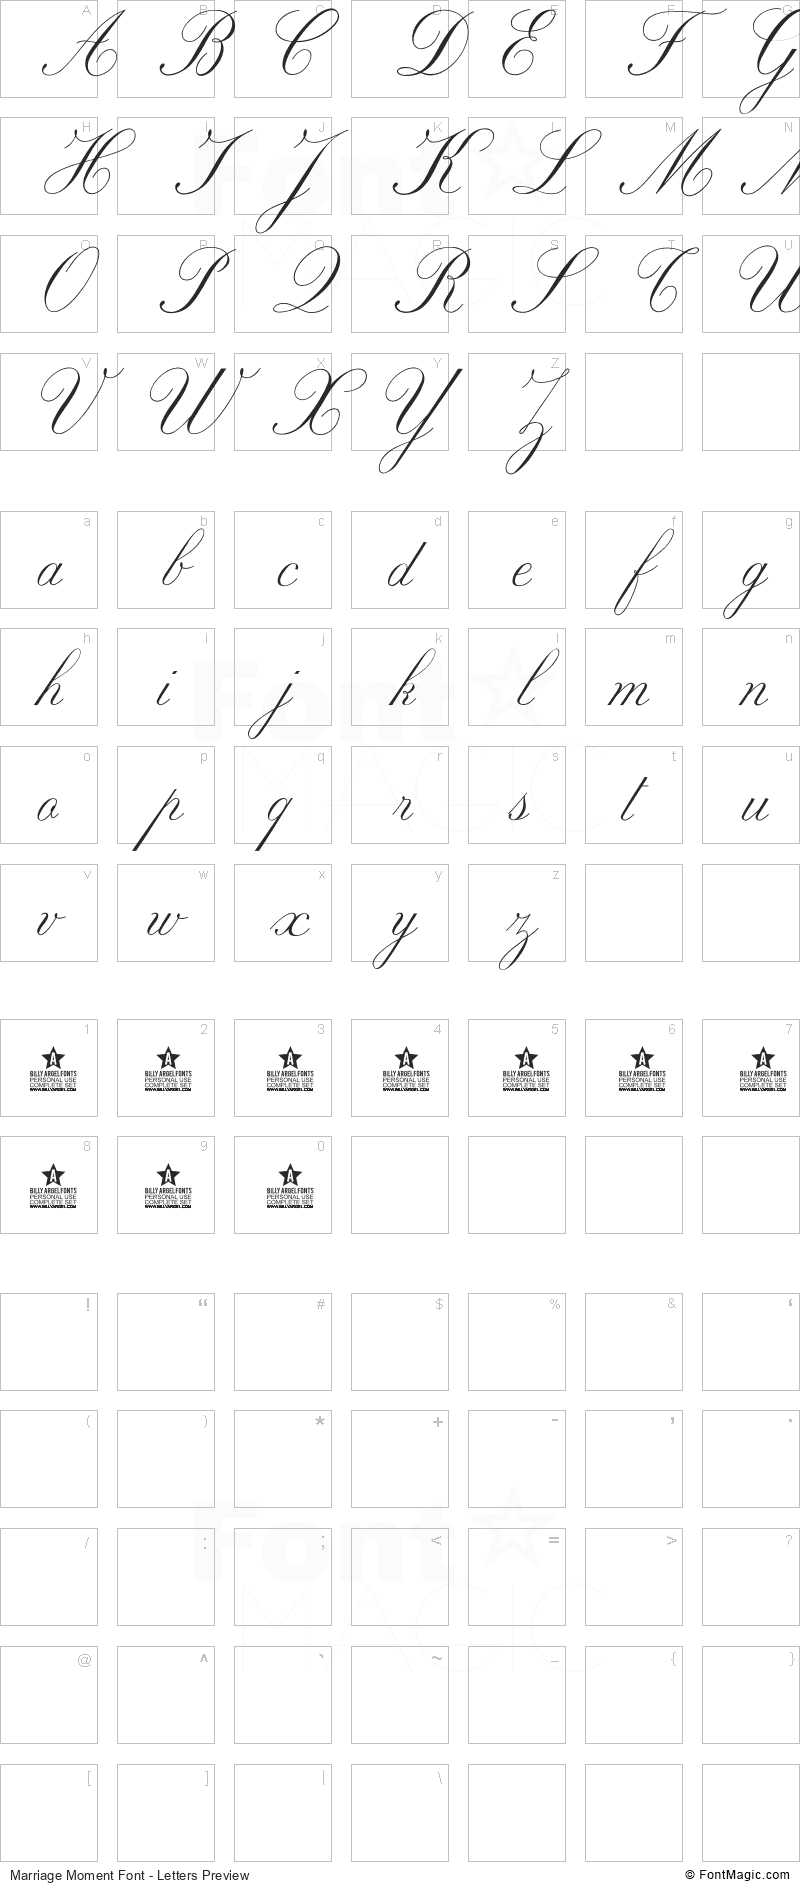 Marriage Moment Font - All Latters Preview Chart